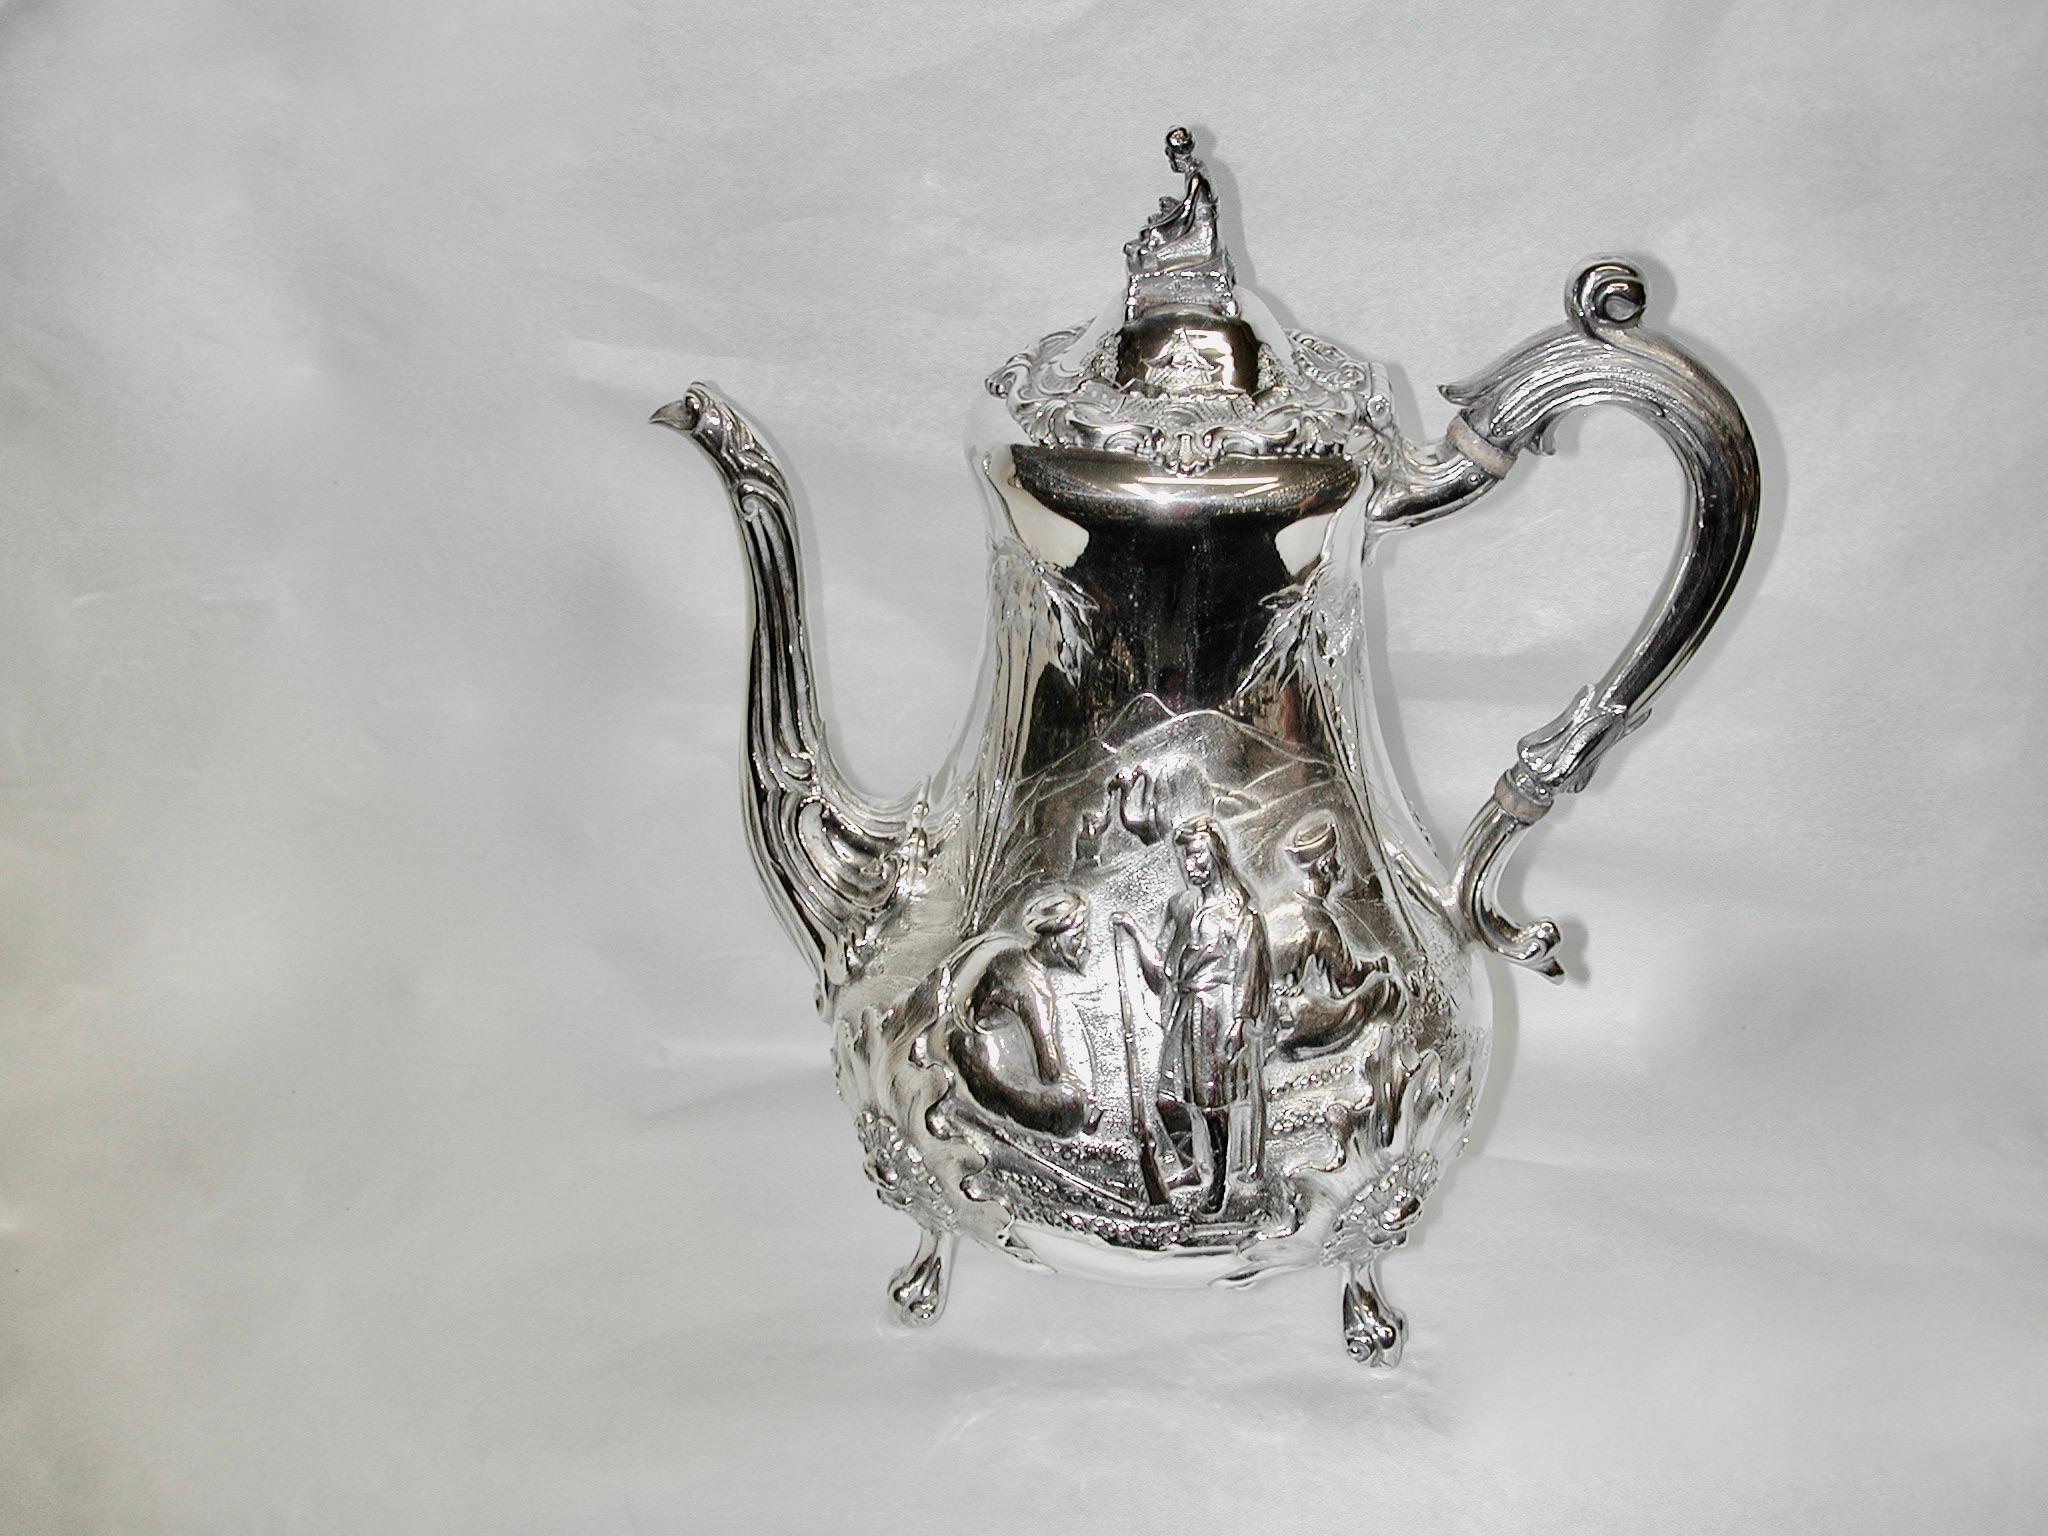 4 Piece Scenic Victorian Silver Tea & Coffee Set Robert Harper 1862/63 London.
Each piece has a wonderful scene appertaining to what goes into it, along with lovely chasing on the other side.
The coffee pot has a arabic coffee traders scene in